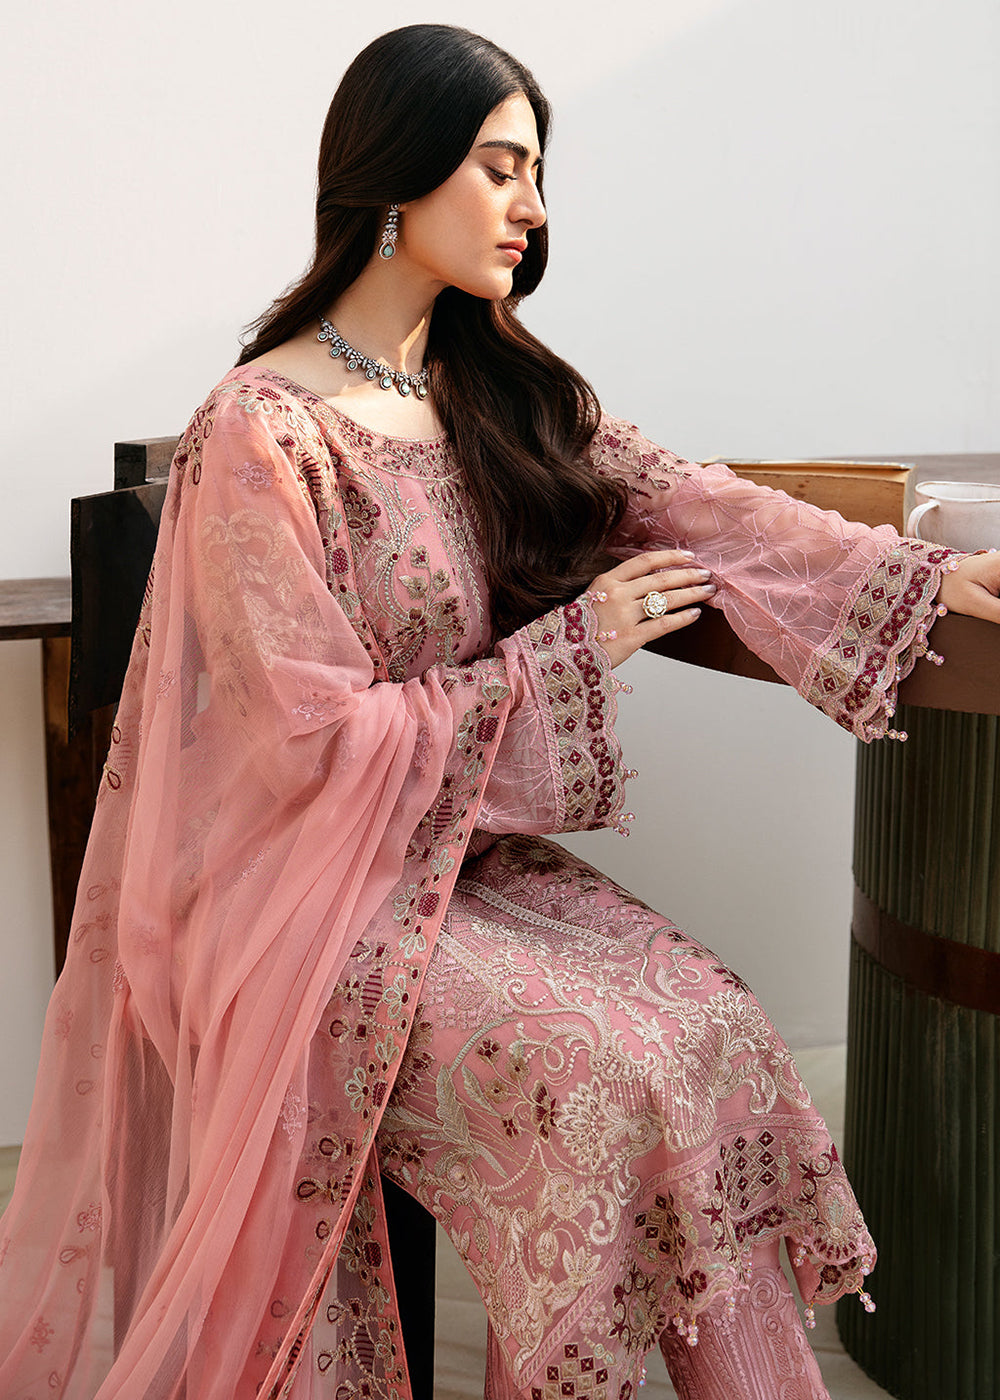 Buy Now Chevron Chiffon Collection Volume 8 by Ramsha | A-805 Online at Empress in USA, UK, Canada & Worldwide at Empress Clothing.